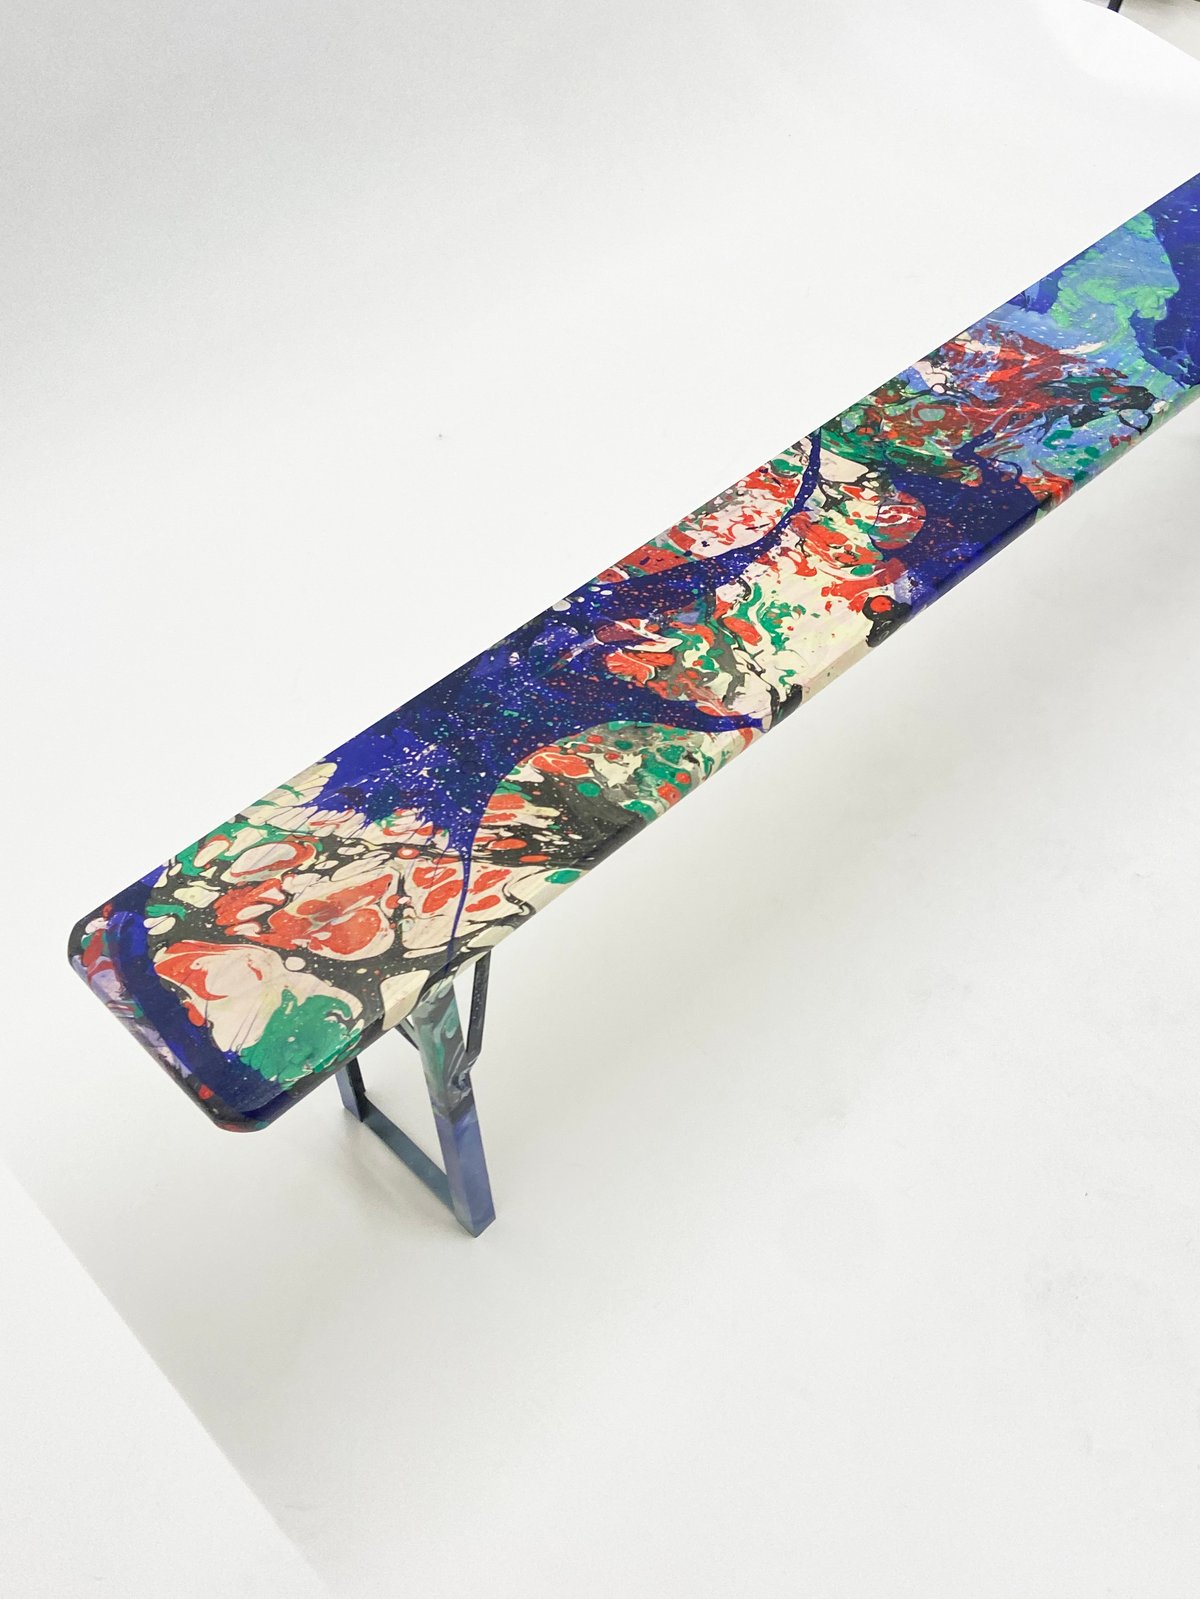 MARBLED BENCH #1